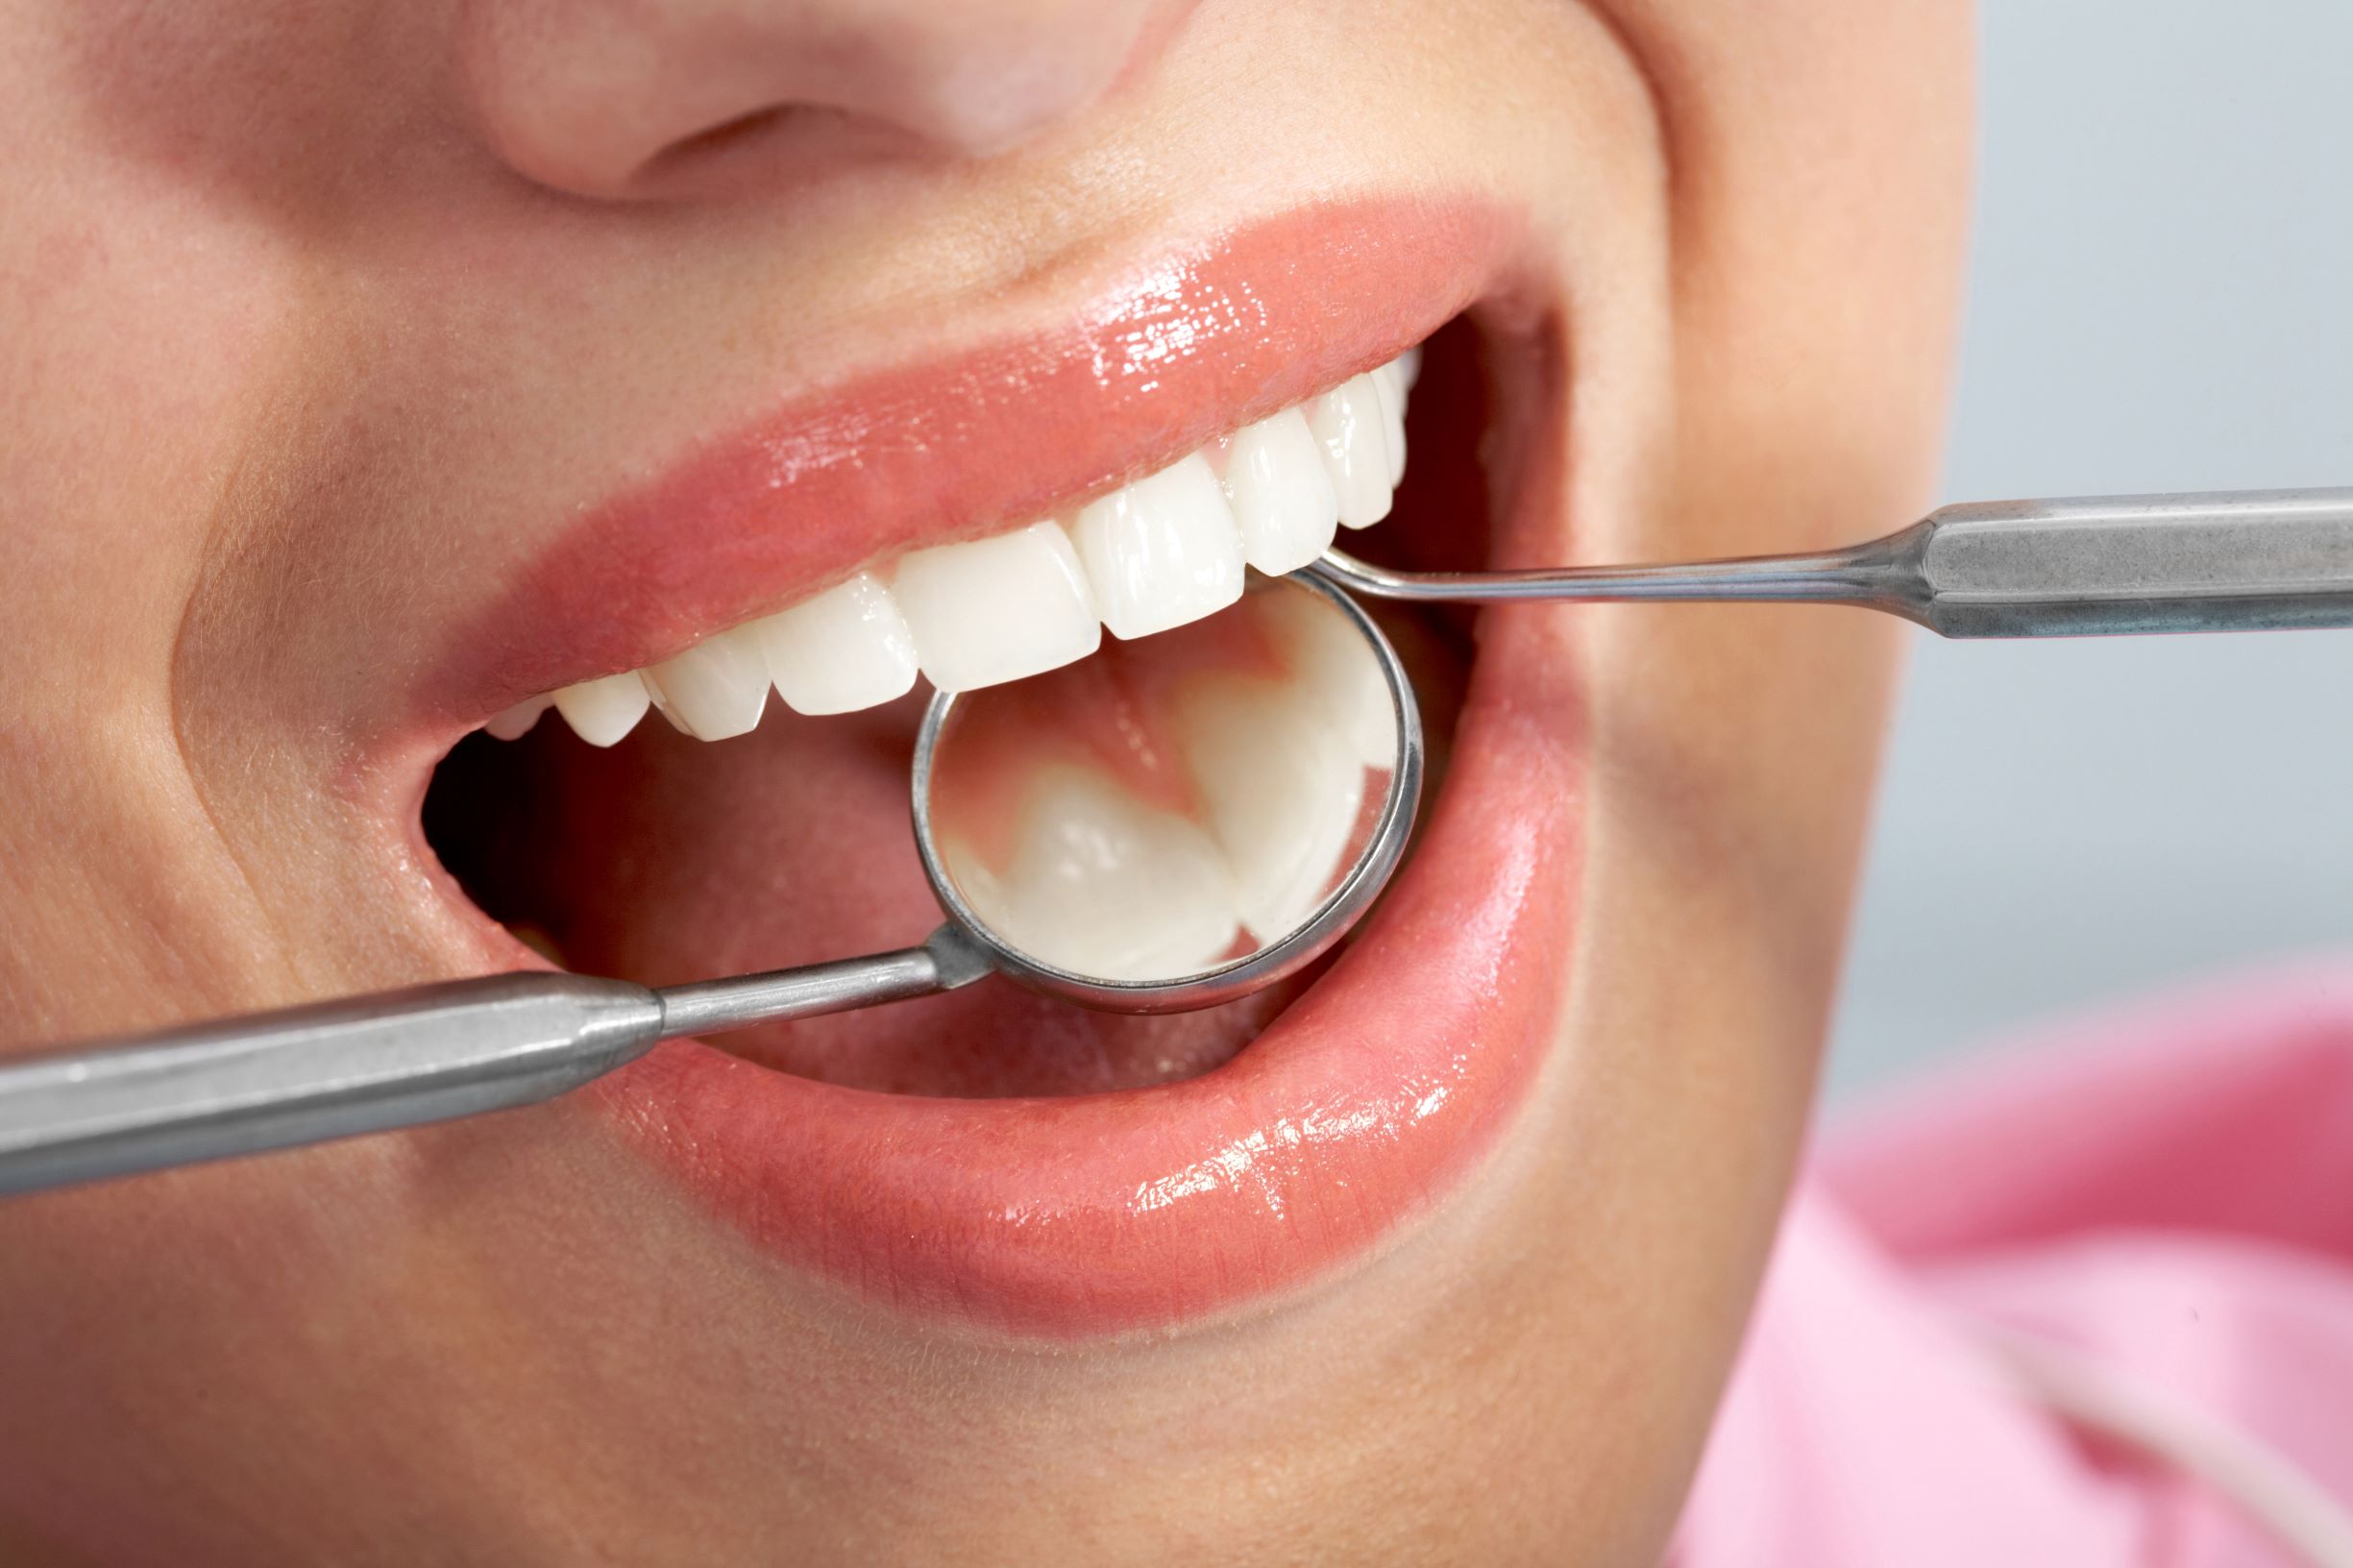 A dental filling procedure includes several steps. The dentist can explain them to help you follow along.